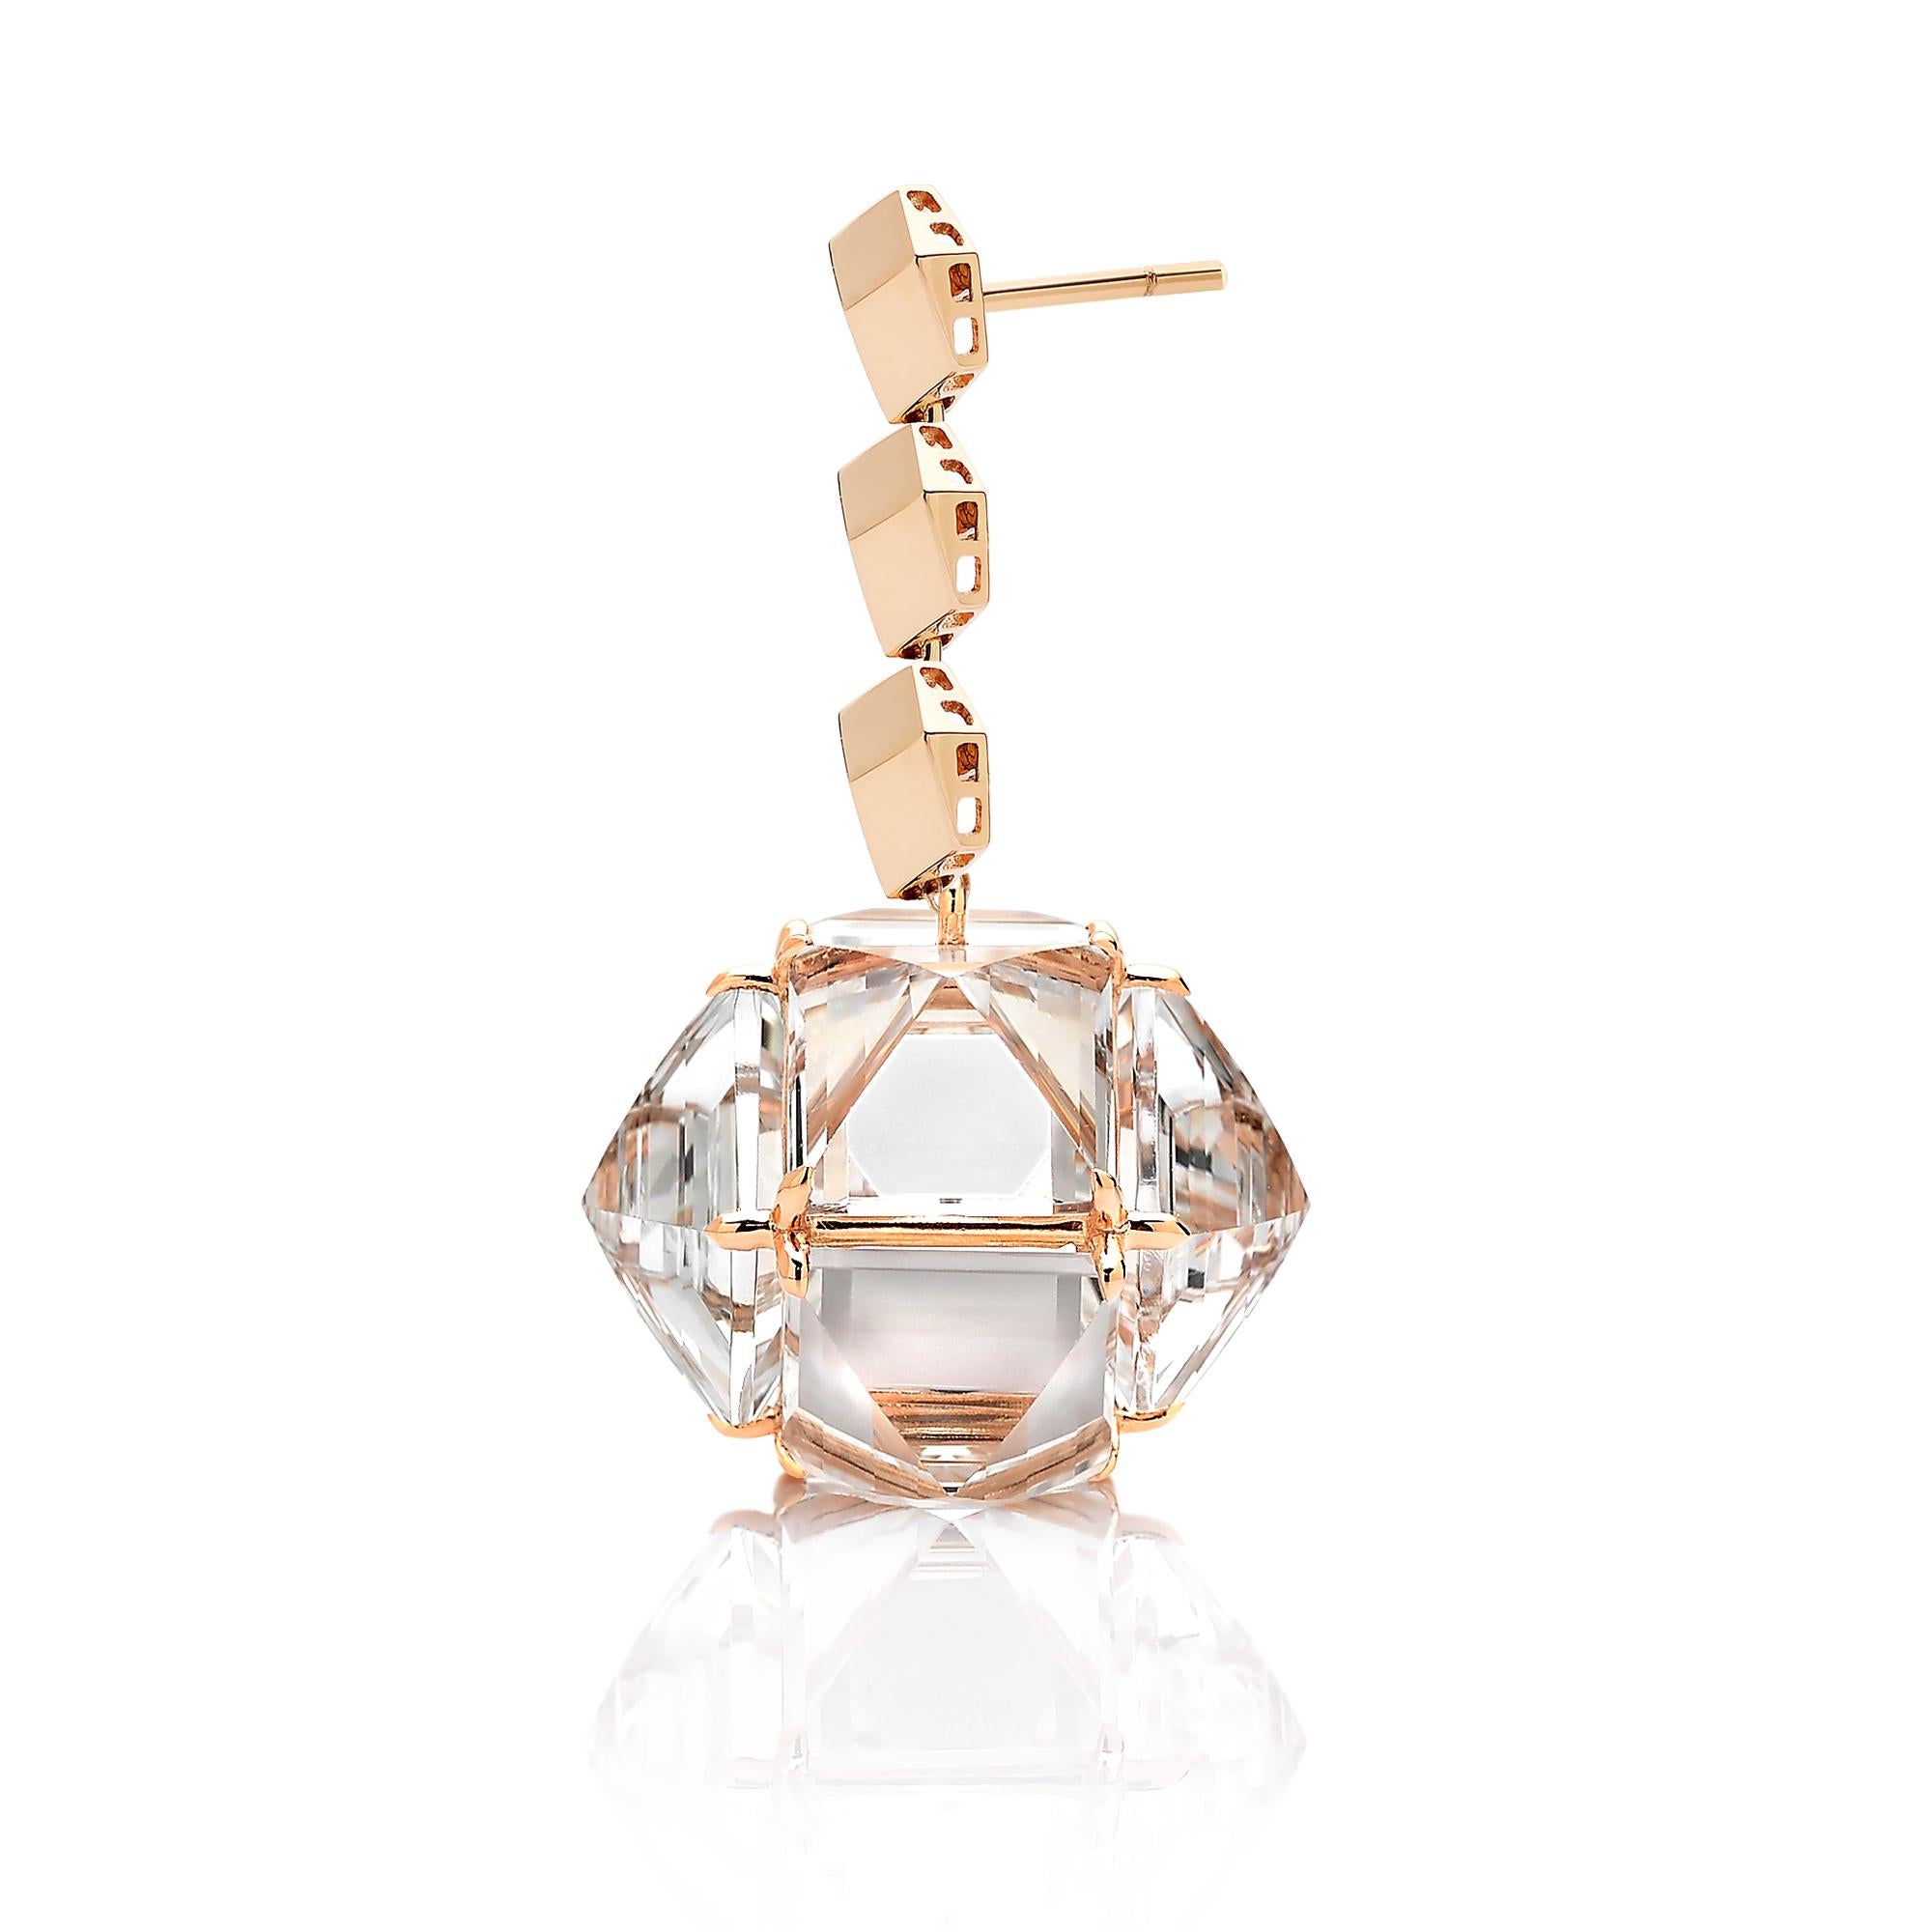 High polish 18 karat rose gold Brillante earrings paired with reverse-set emerald-cut white topaz earring pendants from the Very PC collection.

Staying true to Paolo Costagli’s appreciation for modern and clean geometries, the Very PC® collection